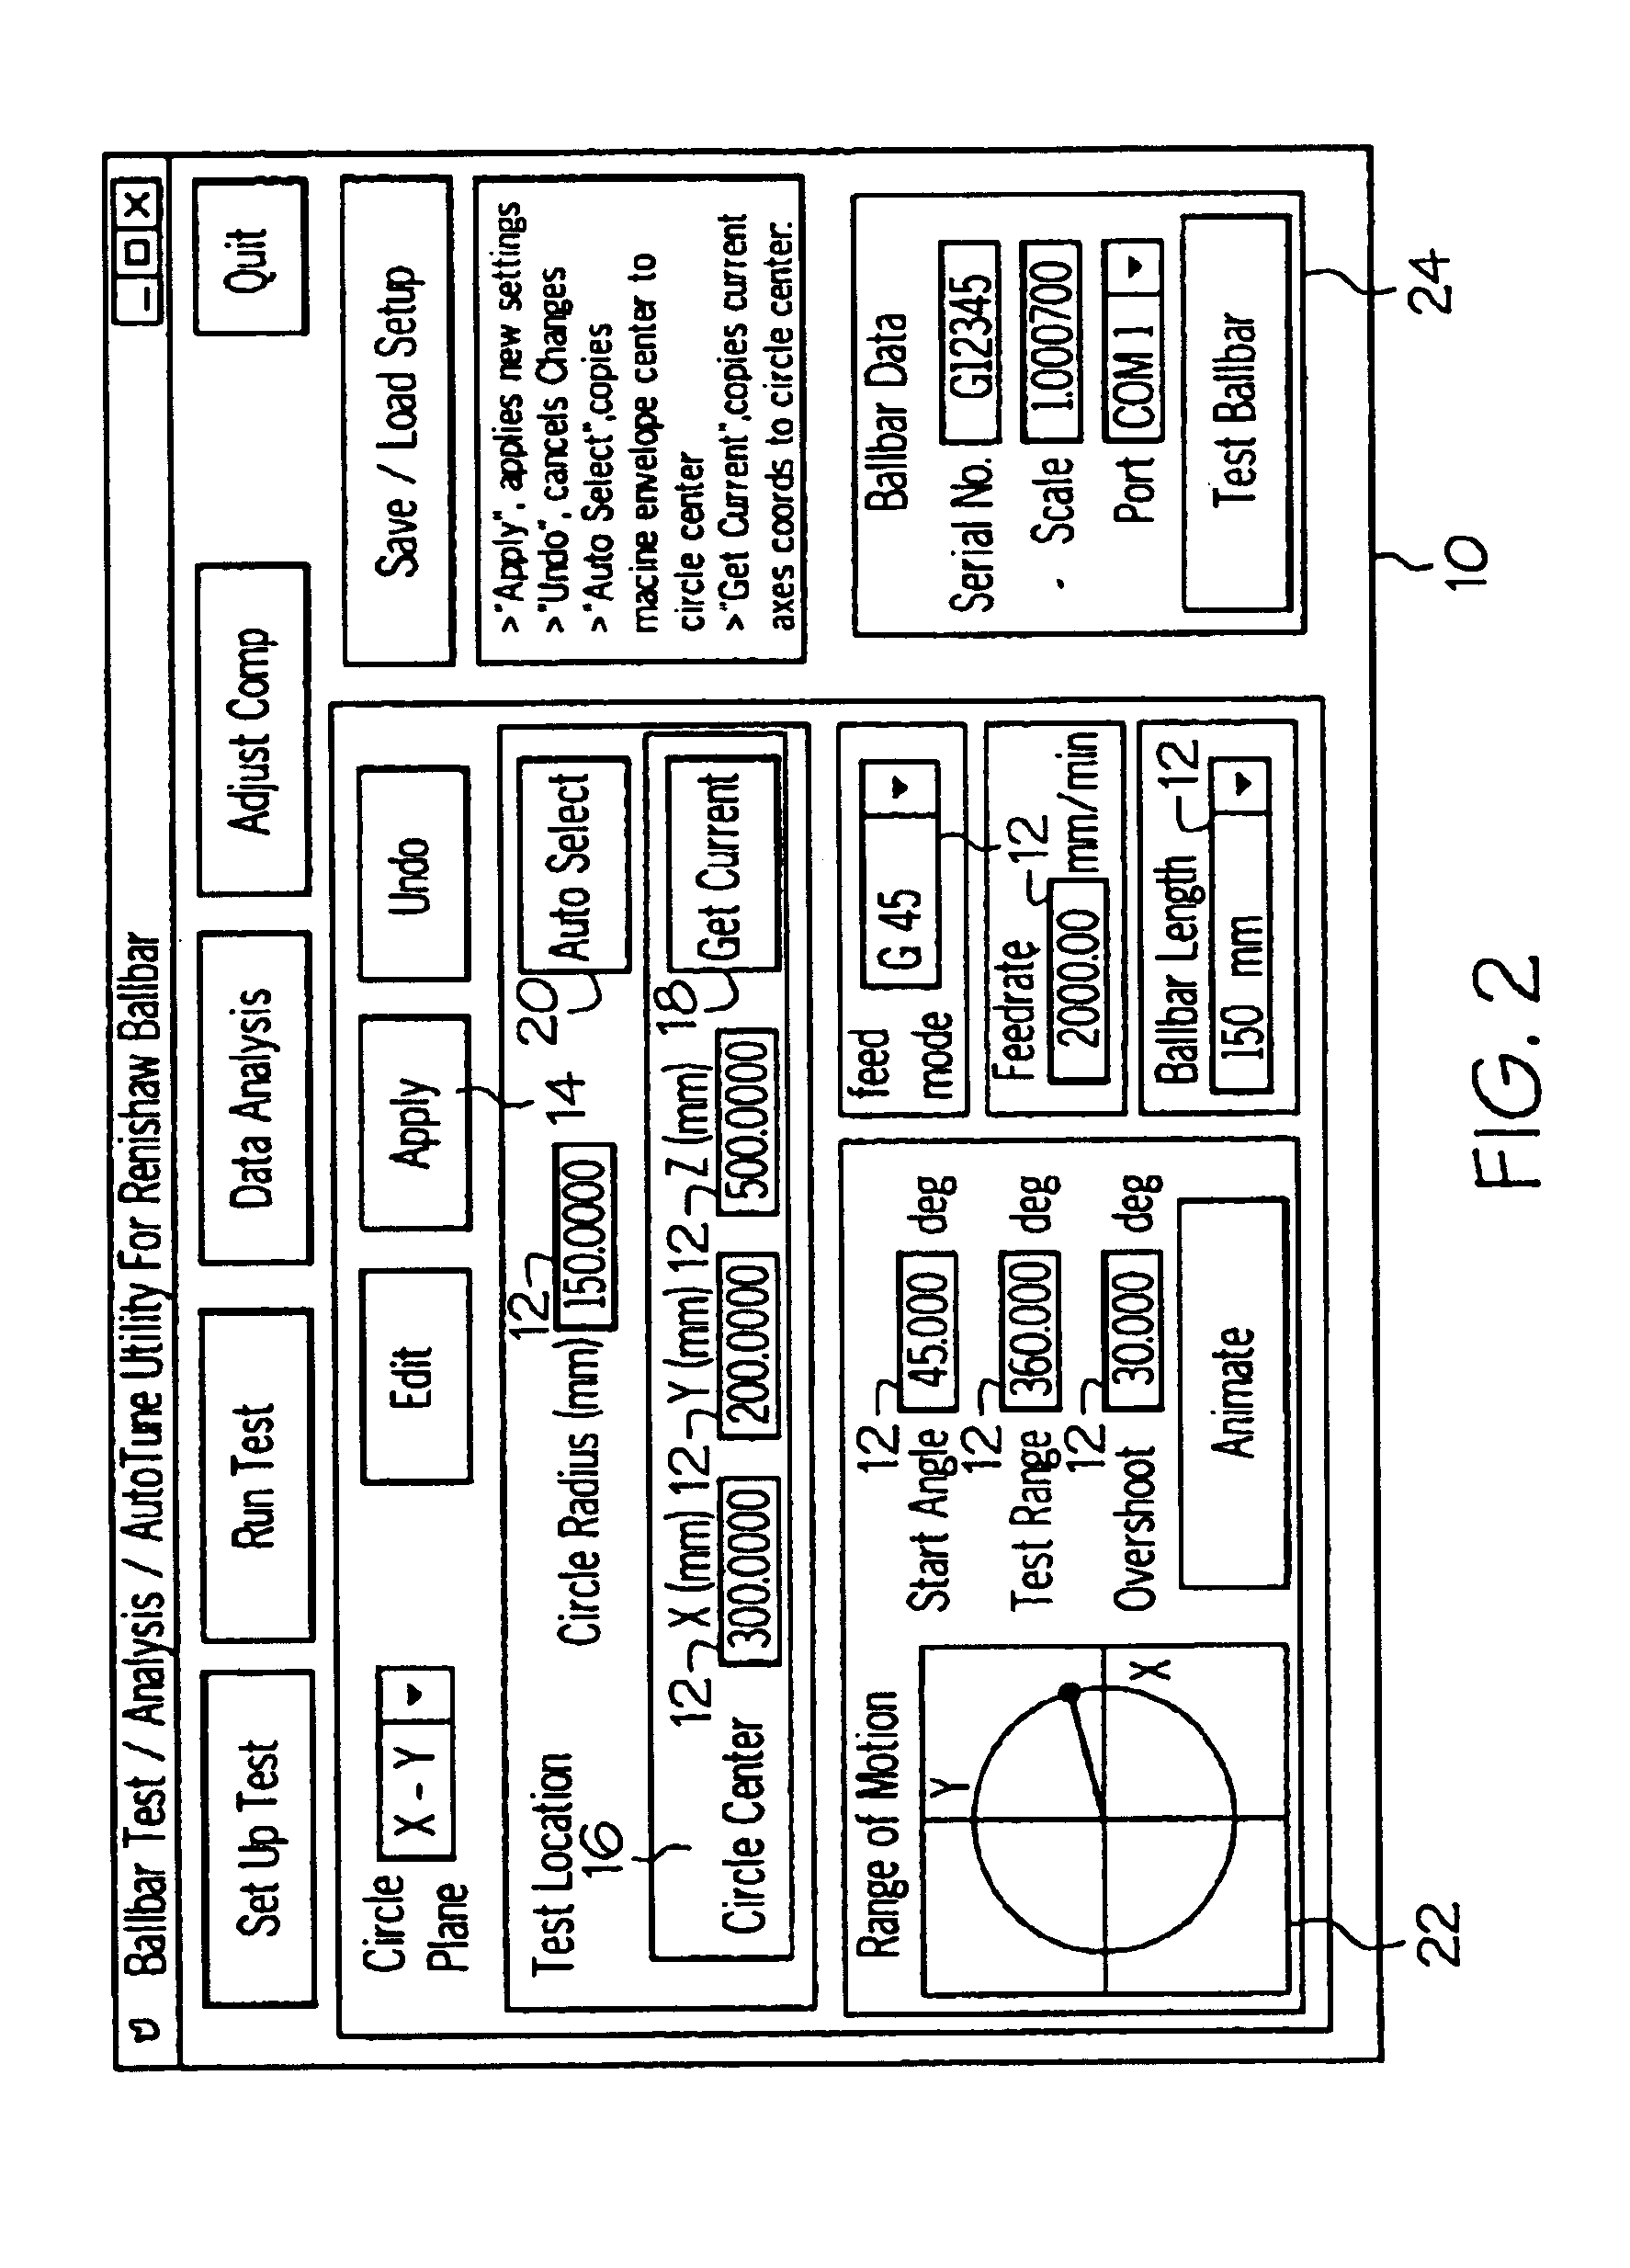 Method and apparatus for tuning compensation parameters in a motion control system associated with a mechanical member